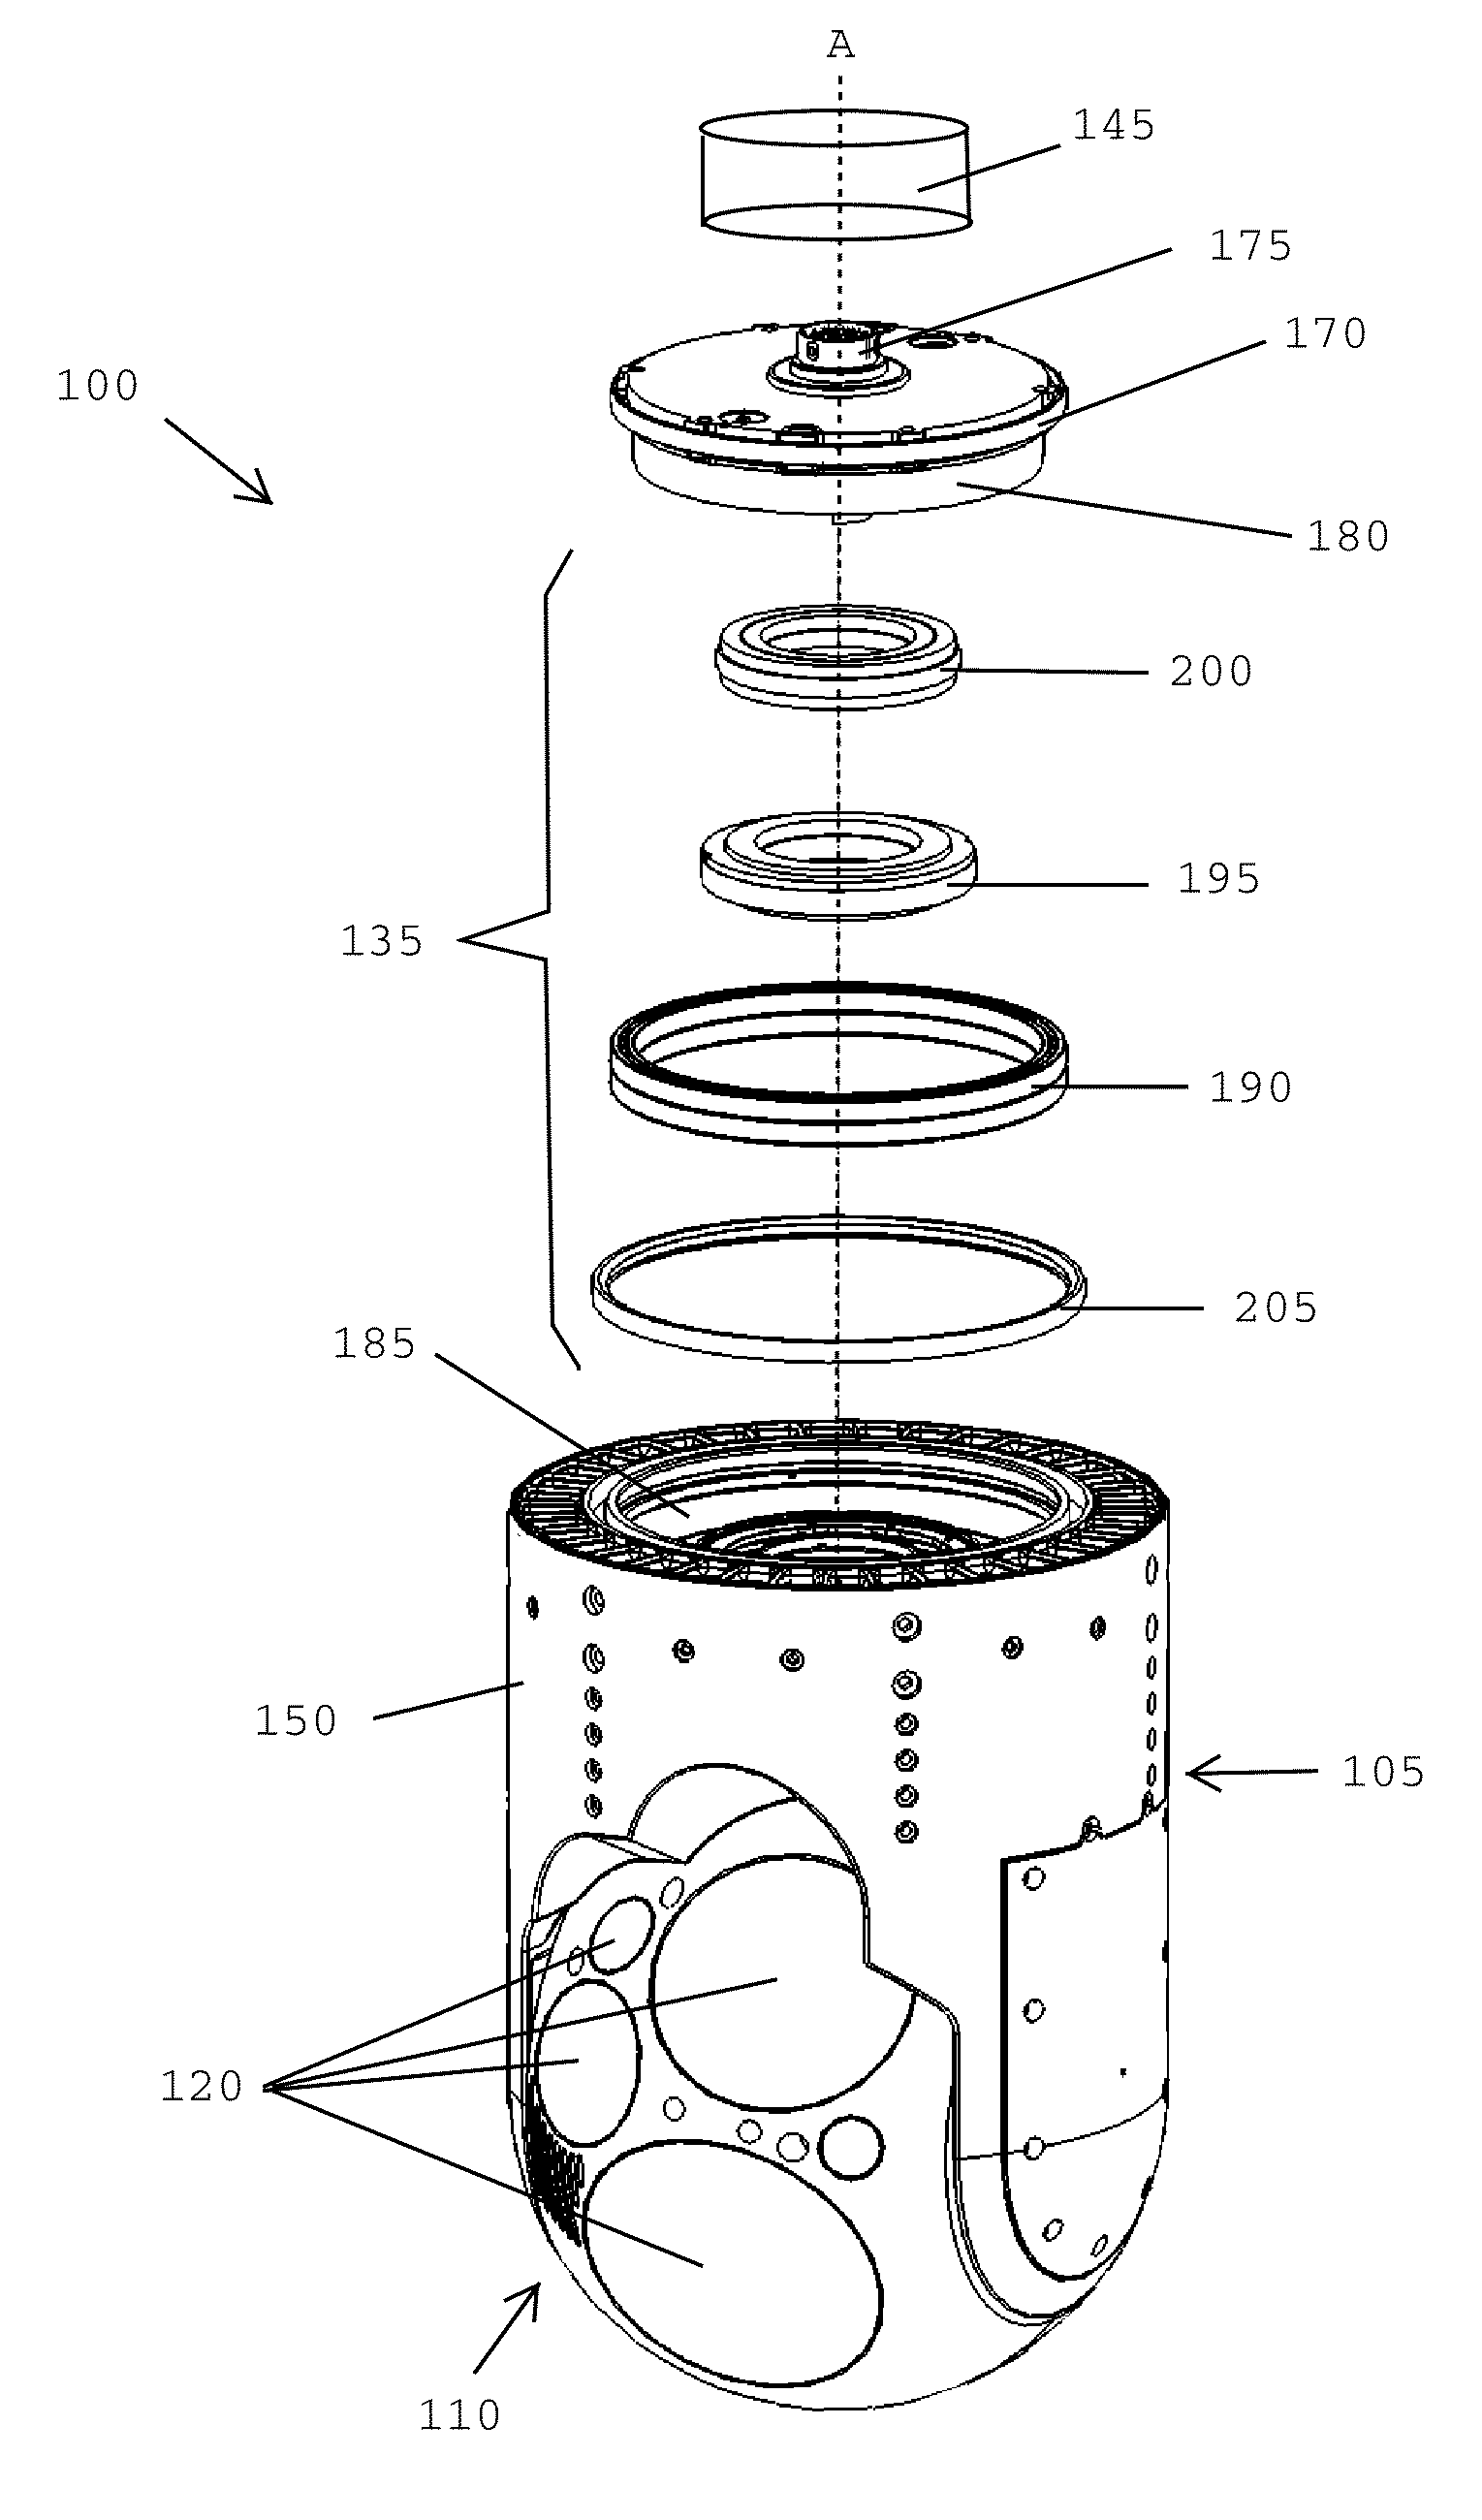 Optical Payload with Folded Telescope and Cryocooler